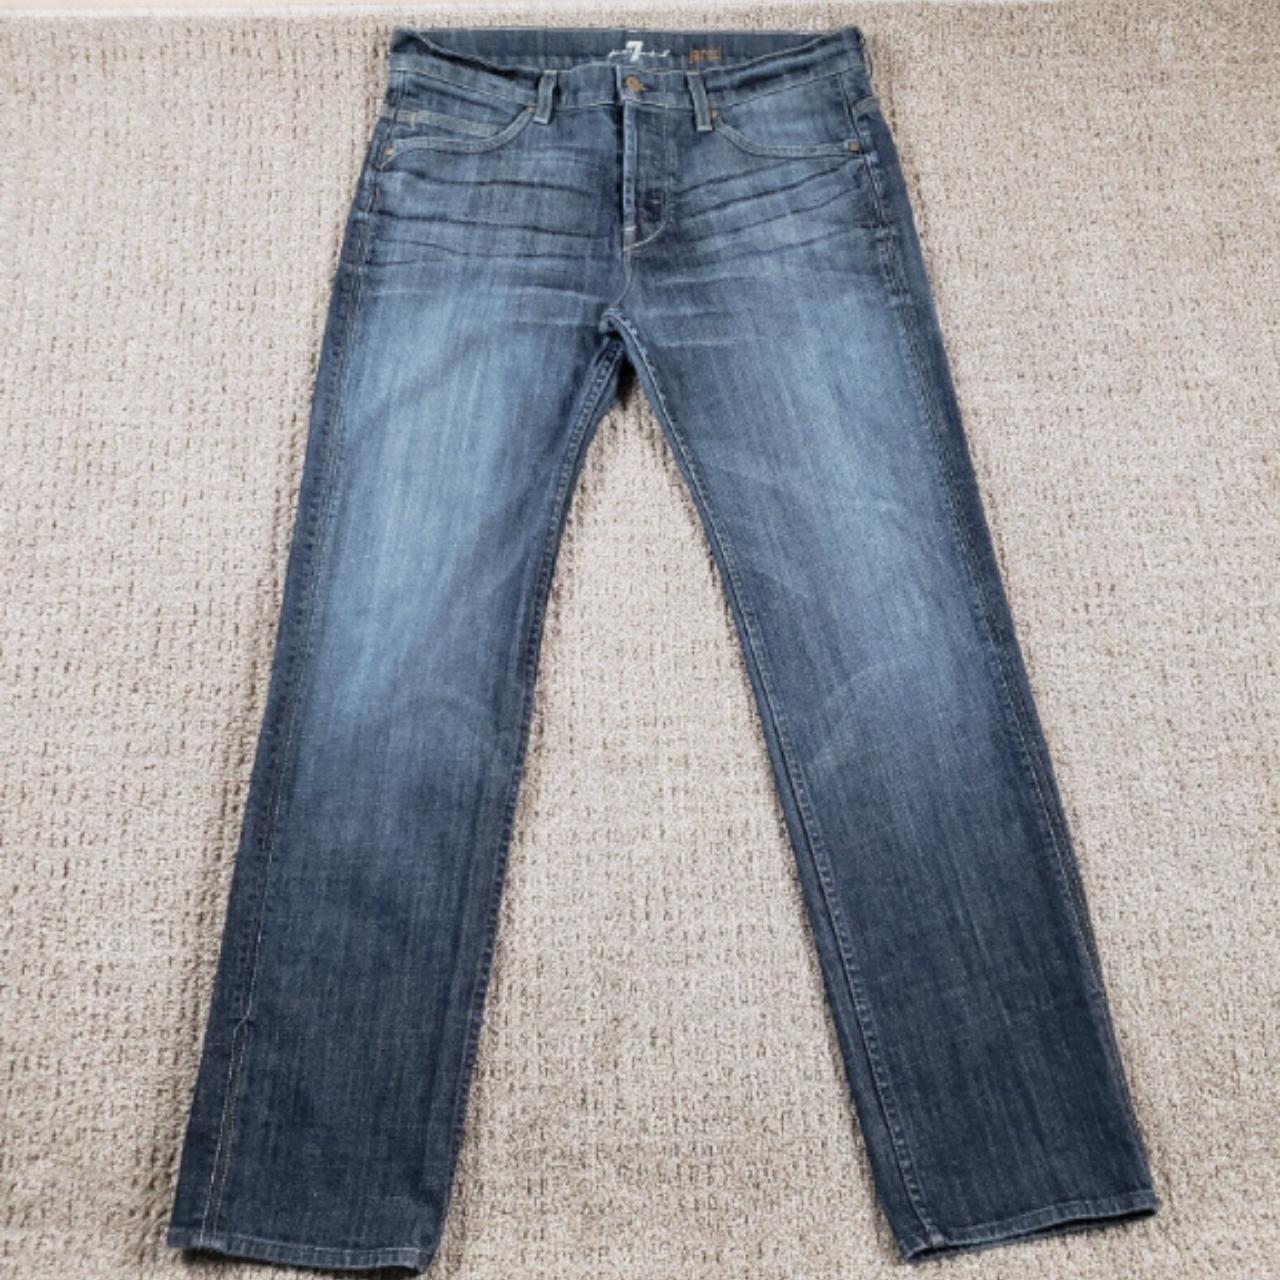 7 FOR ALL MANKIND Jean Mens 34x31 Jared Blue Button... - Depop